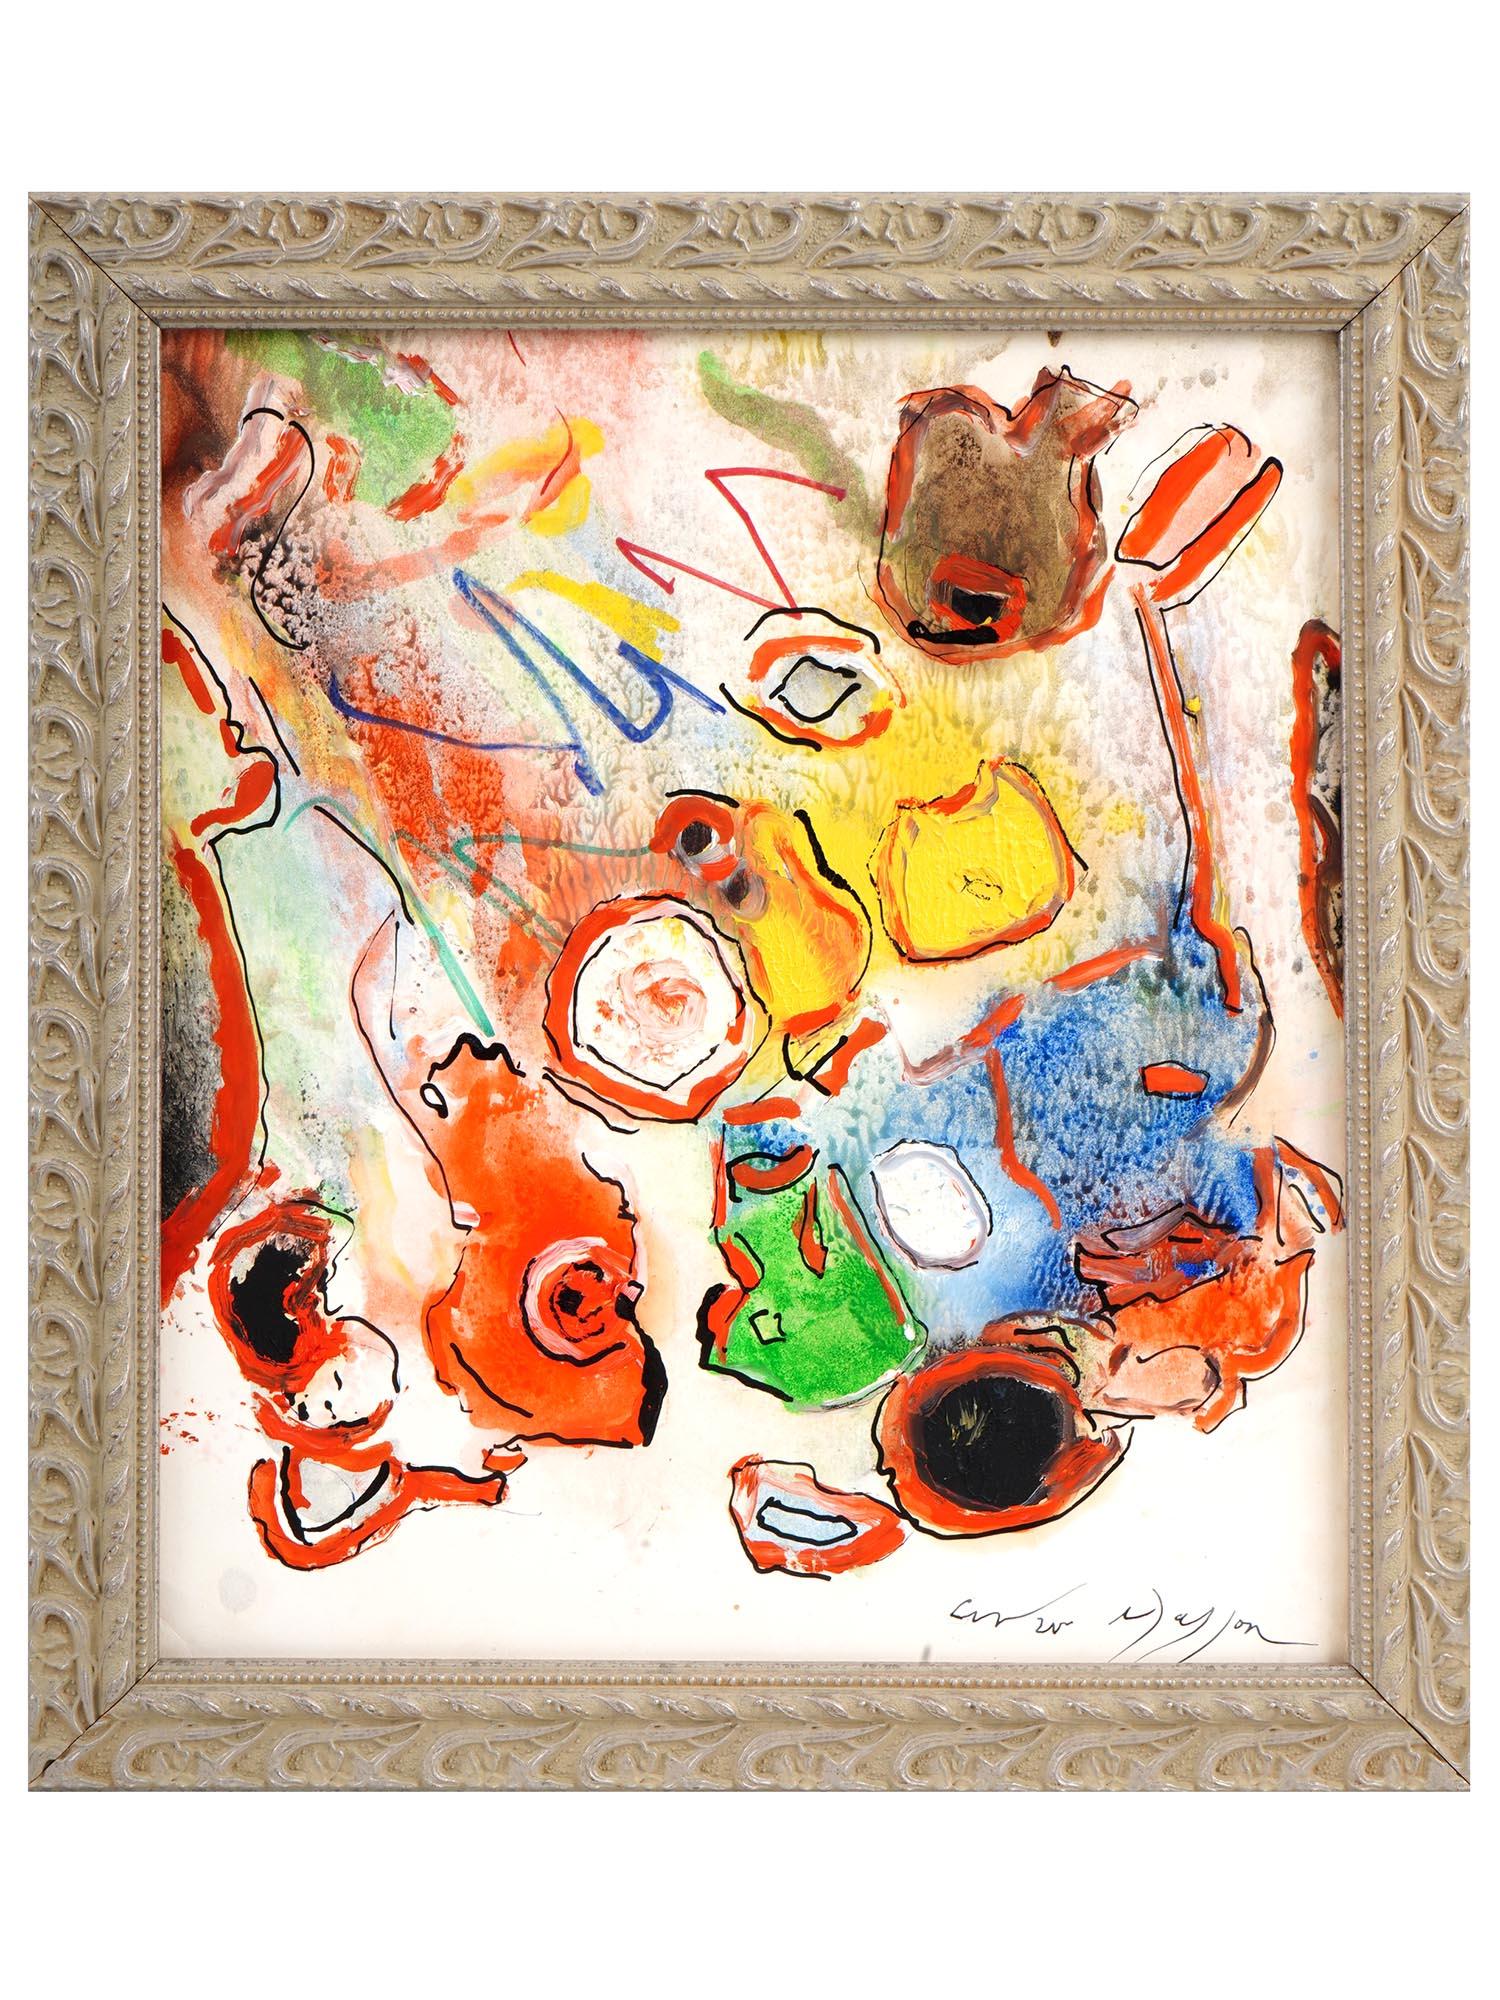 ABSTRACT MIXED MEDIA PAINTING BY ANDRE MASSON PIC-0